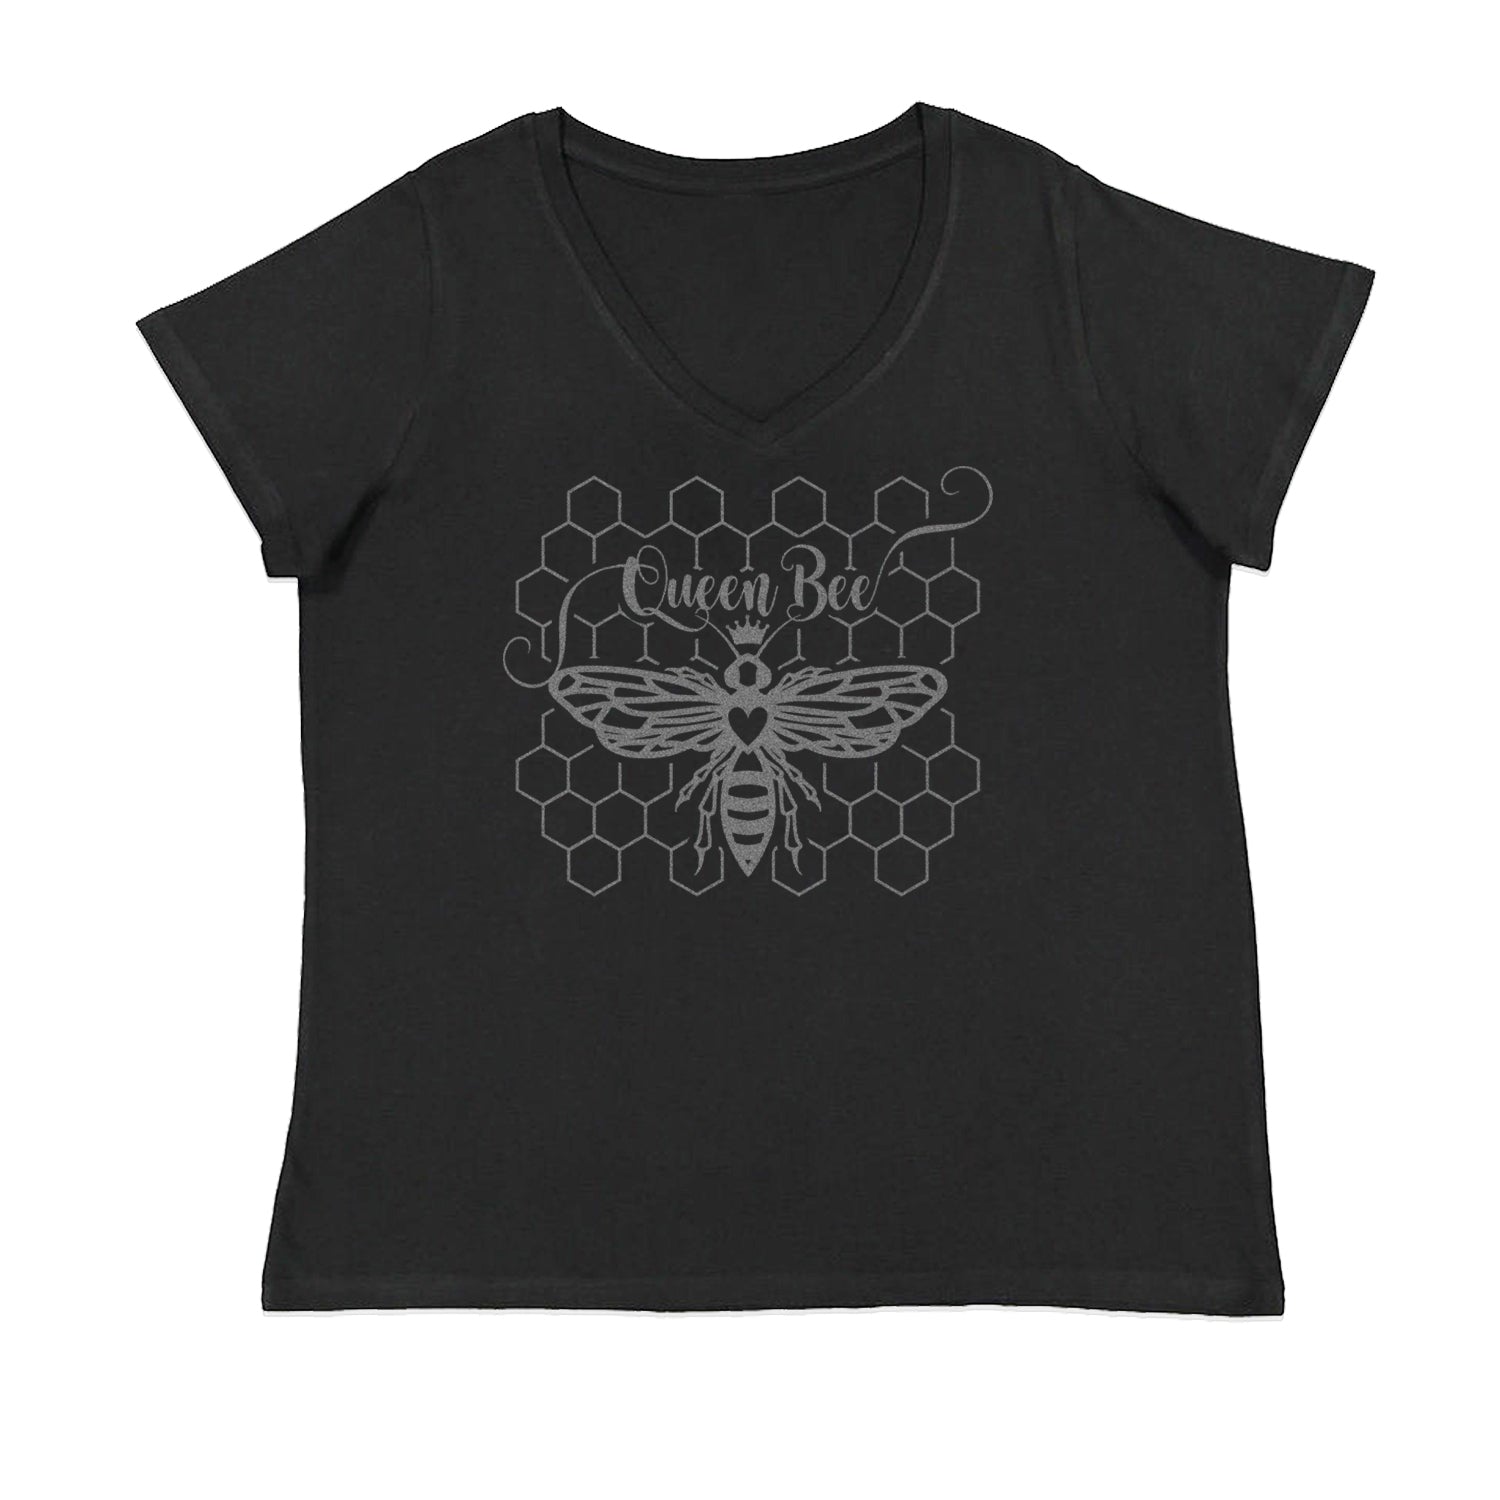 Beehive Queen Bee Metallic Silver Witty Bee Hive Design Womens Plus Size V-Neck T-shirt